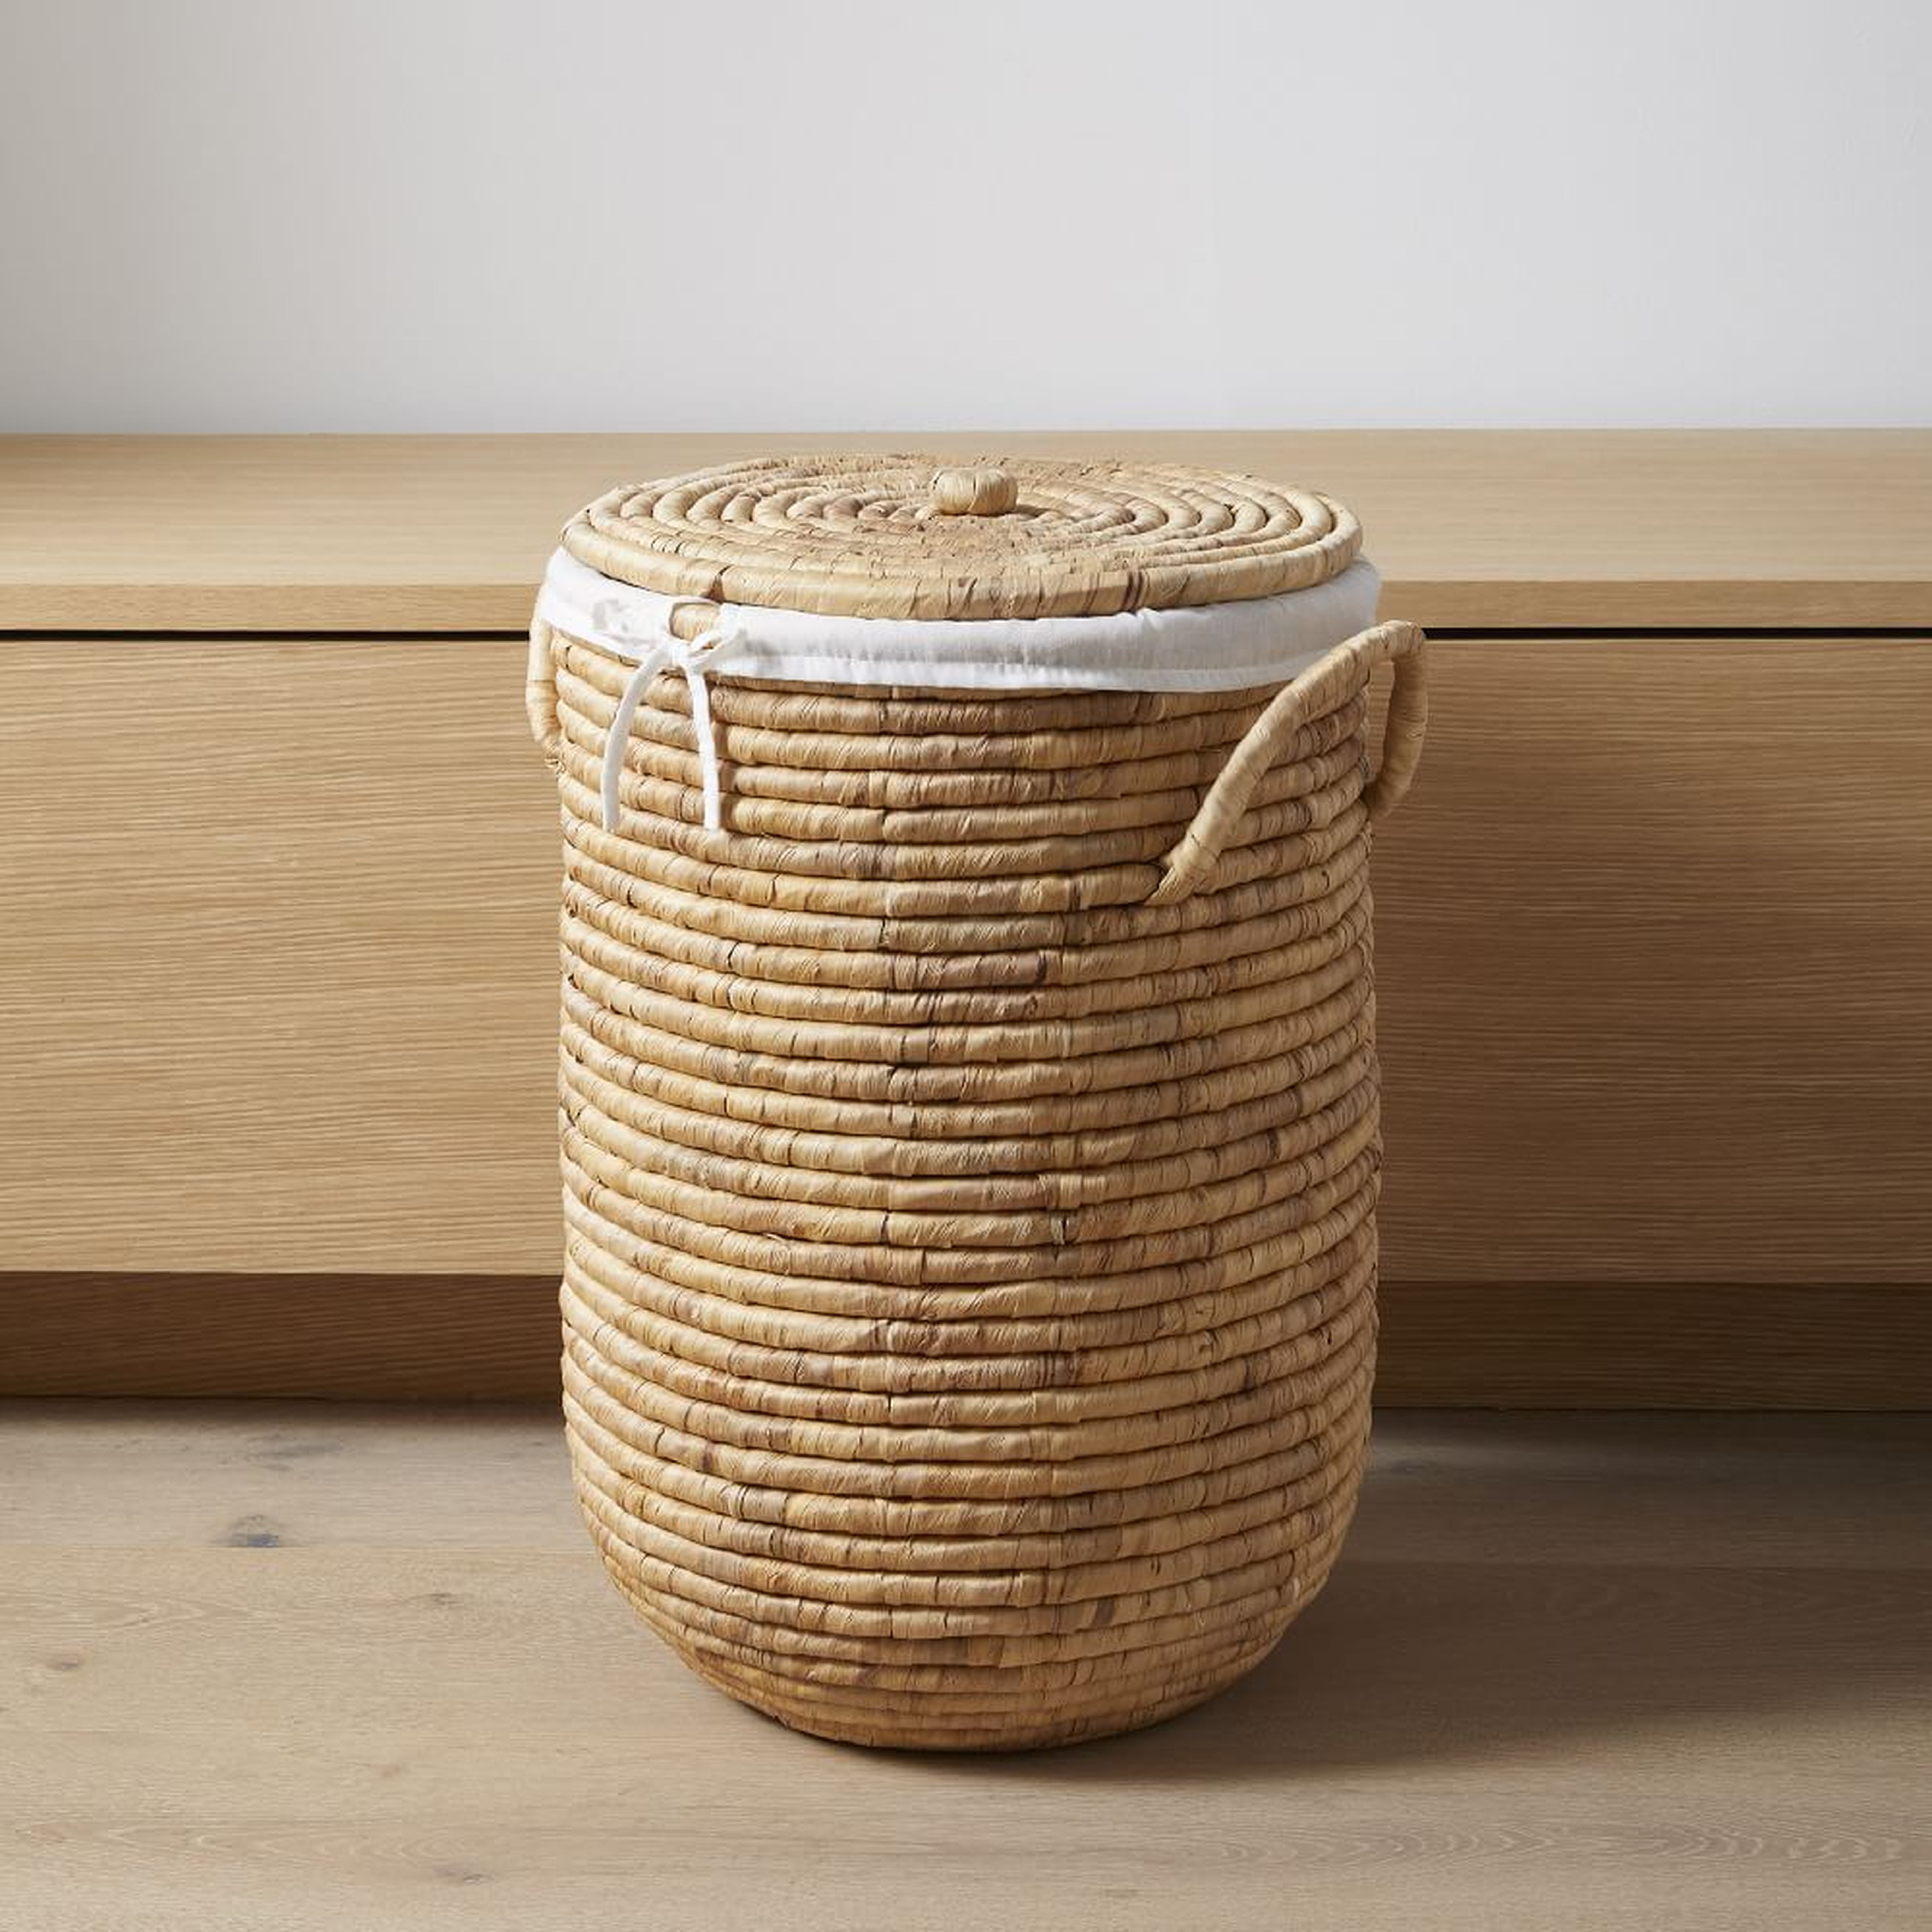 Woven Seagrass Basket, Small Hamper, Natural - West Elm